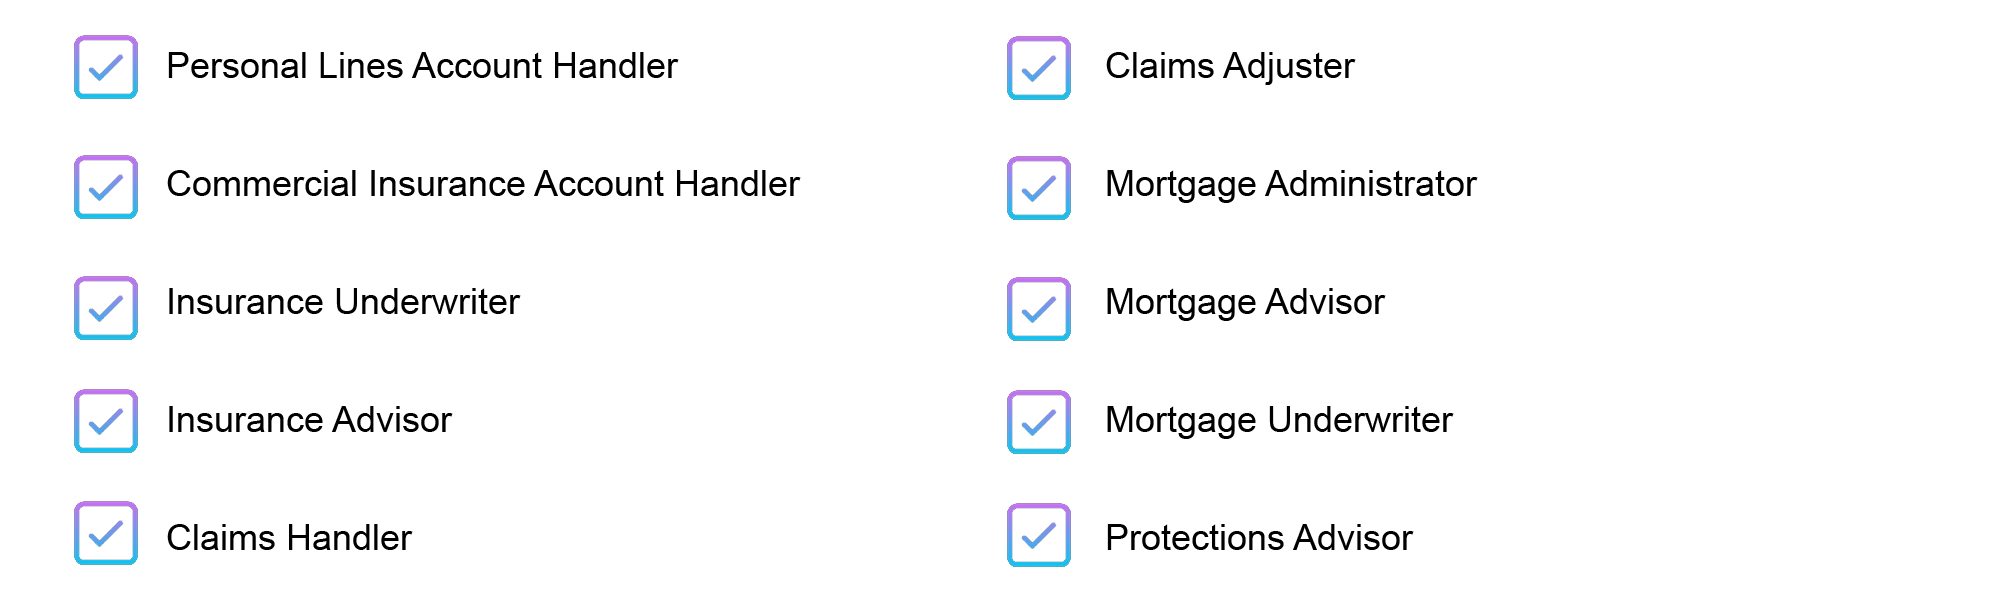 list of FS & Insurance roles including personal lines account handler, commercial insurance account handler, insurance underwriter, insurance advisor, claims handler, claims adjuster, mortgage administrator, mortgage advisor, mortgage underwriter and protections advisor